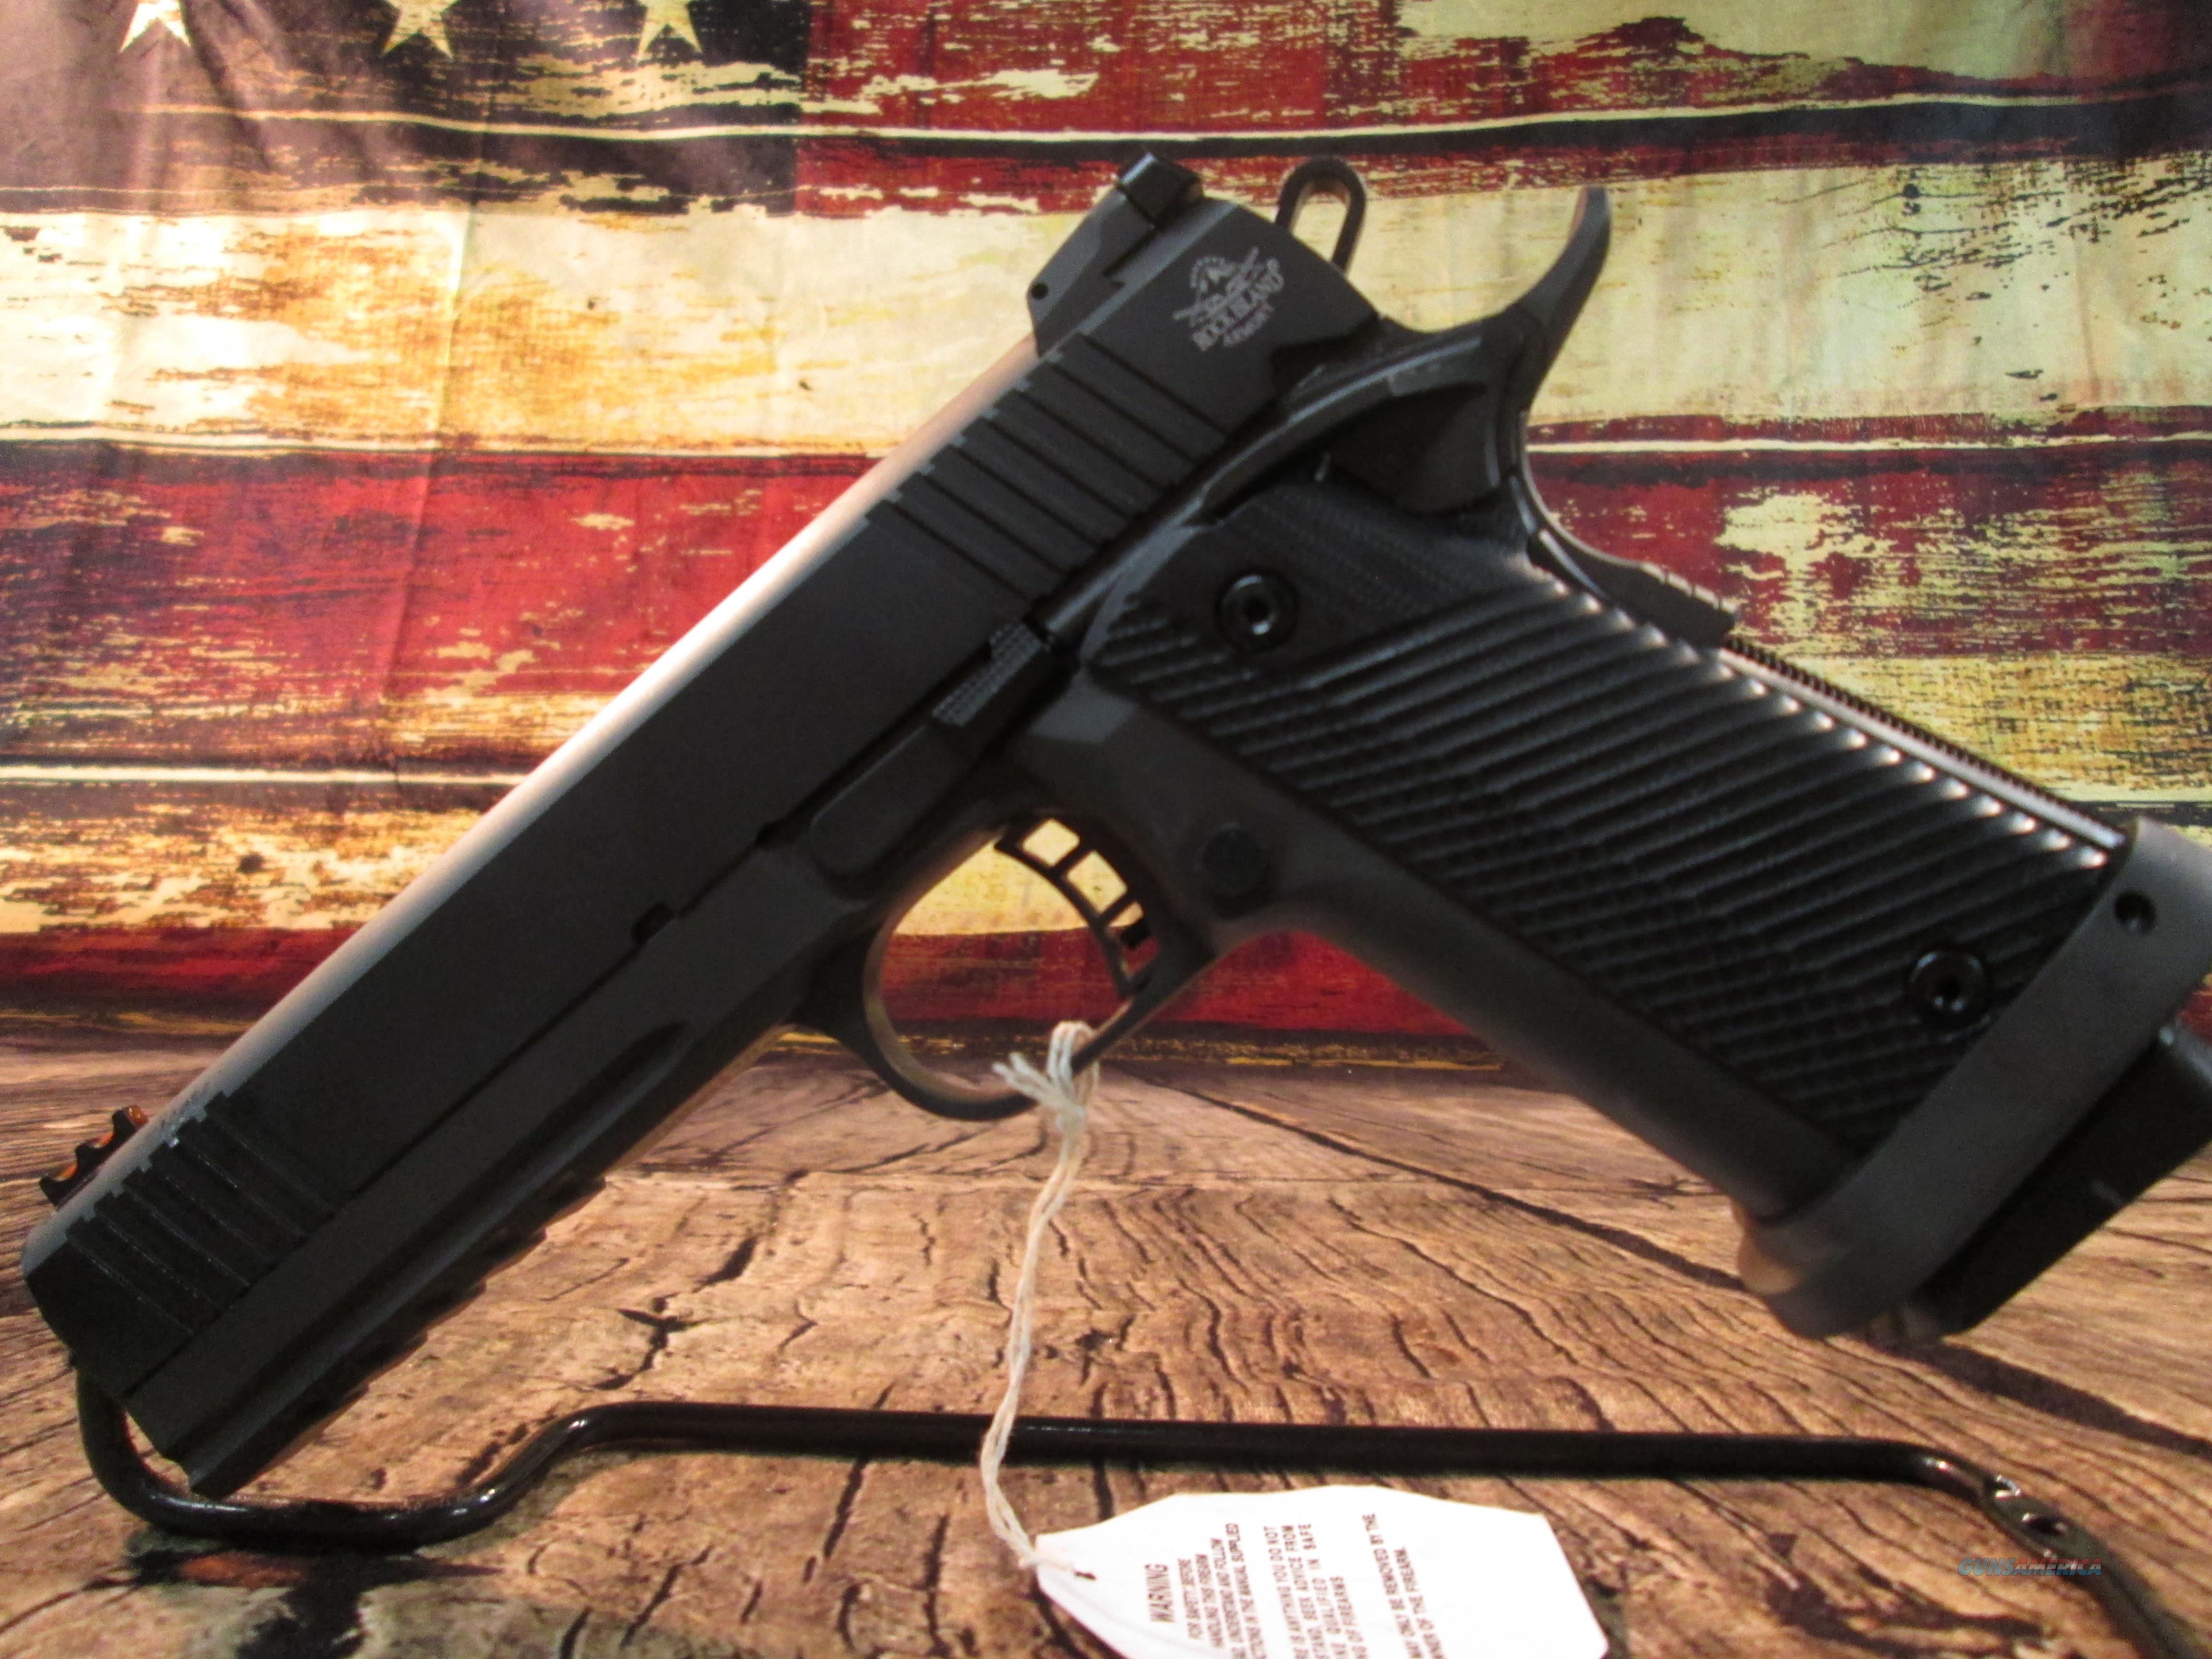 Rock Island Tac Ultra 9mm New 51679 For Sale 5370